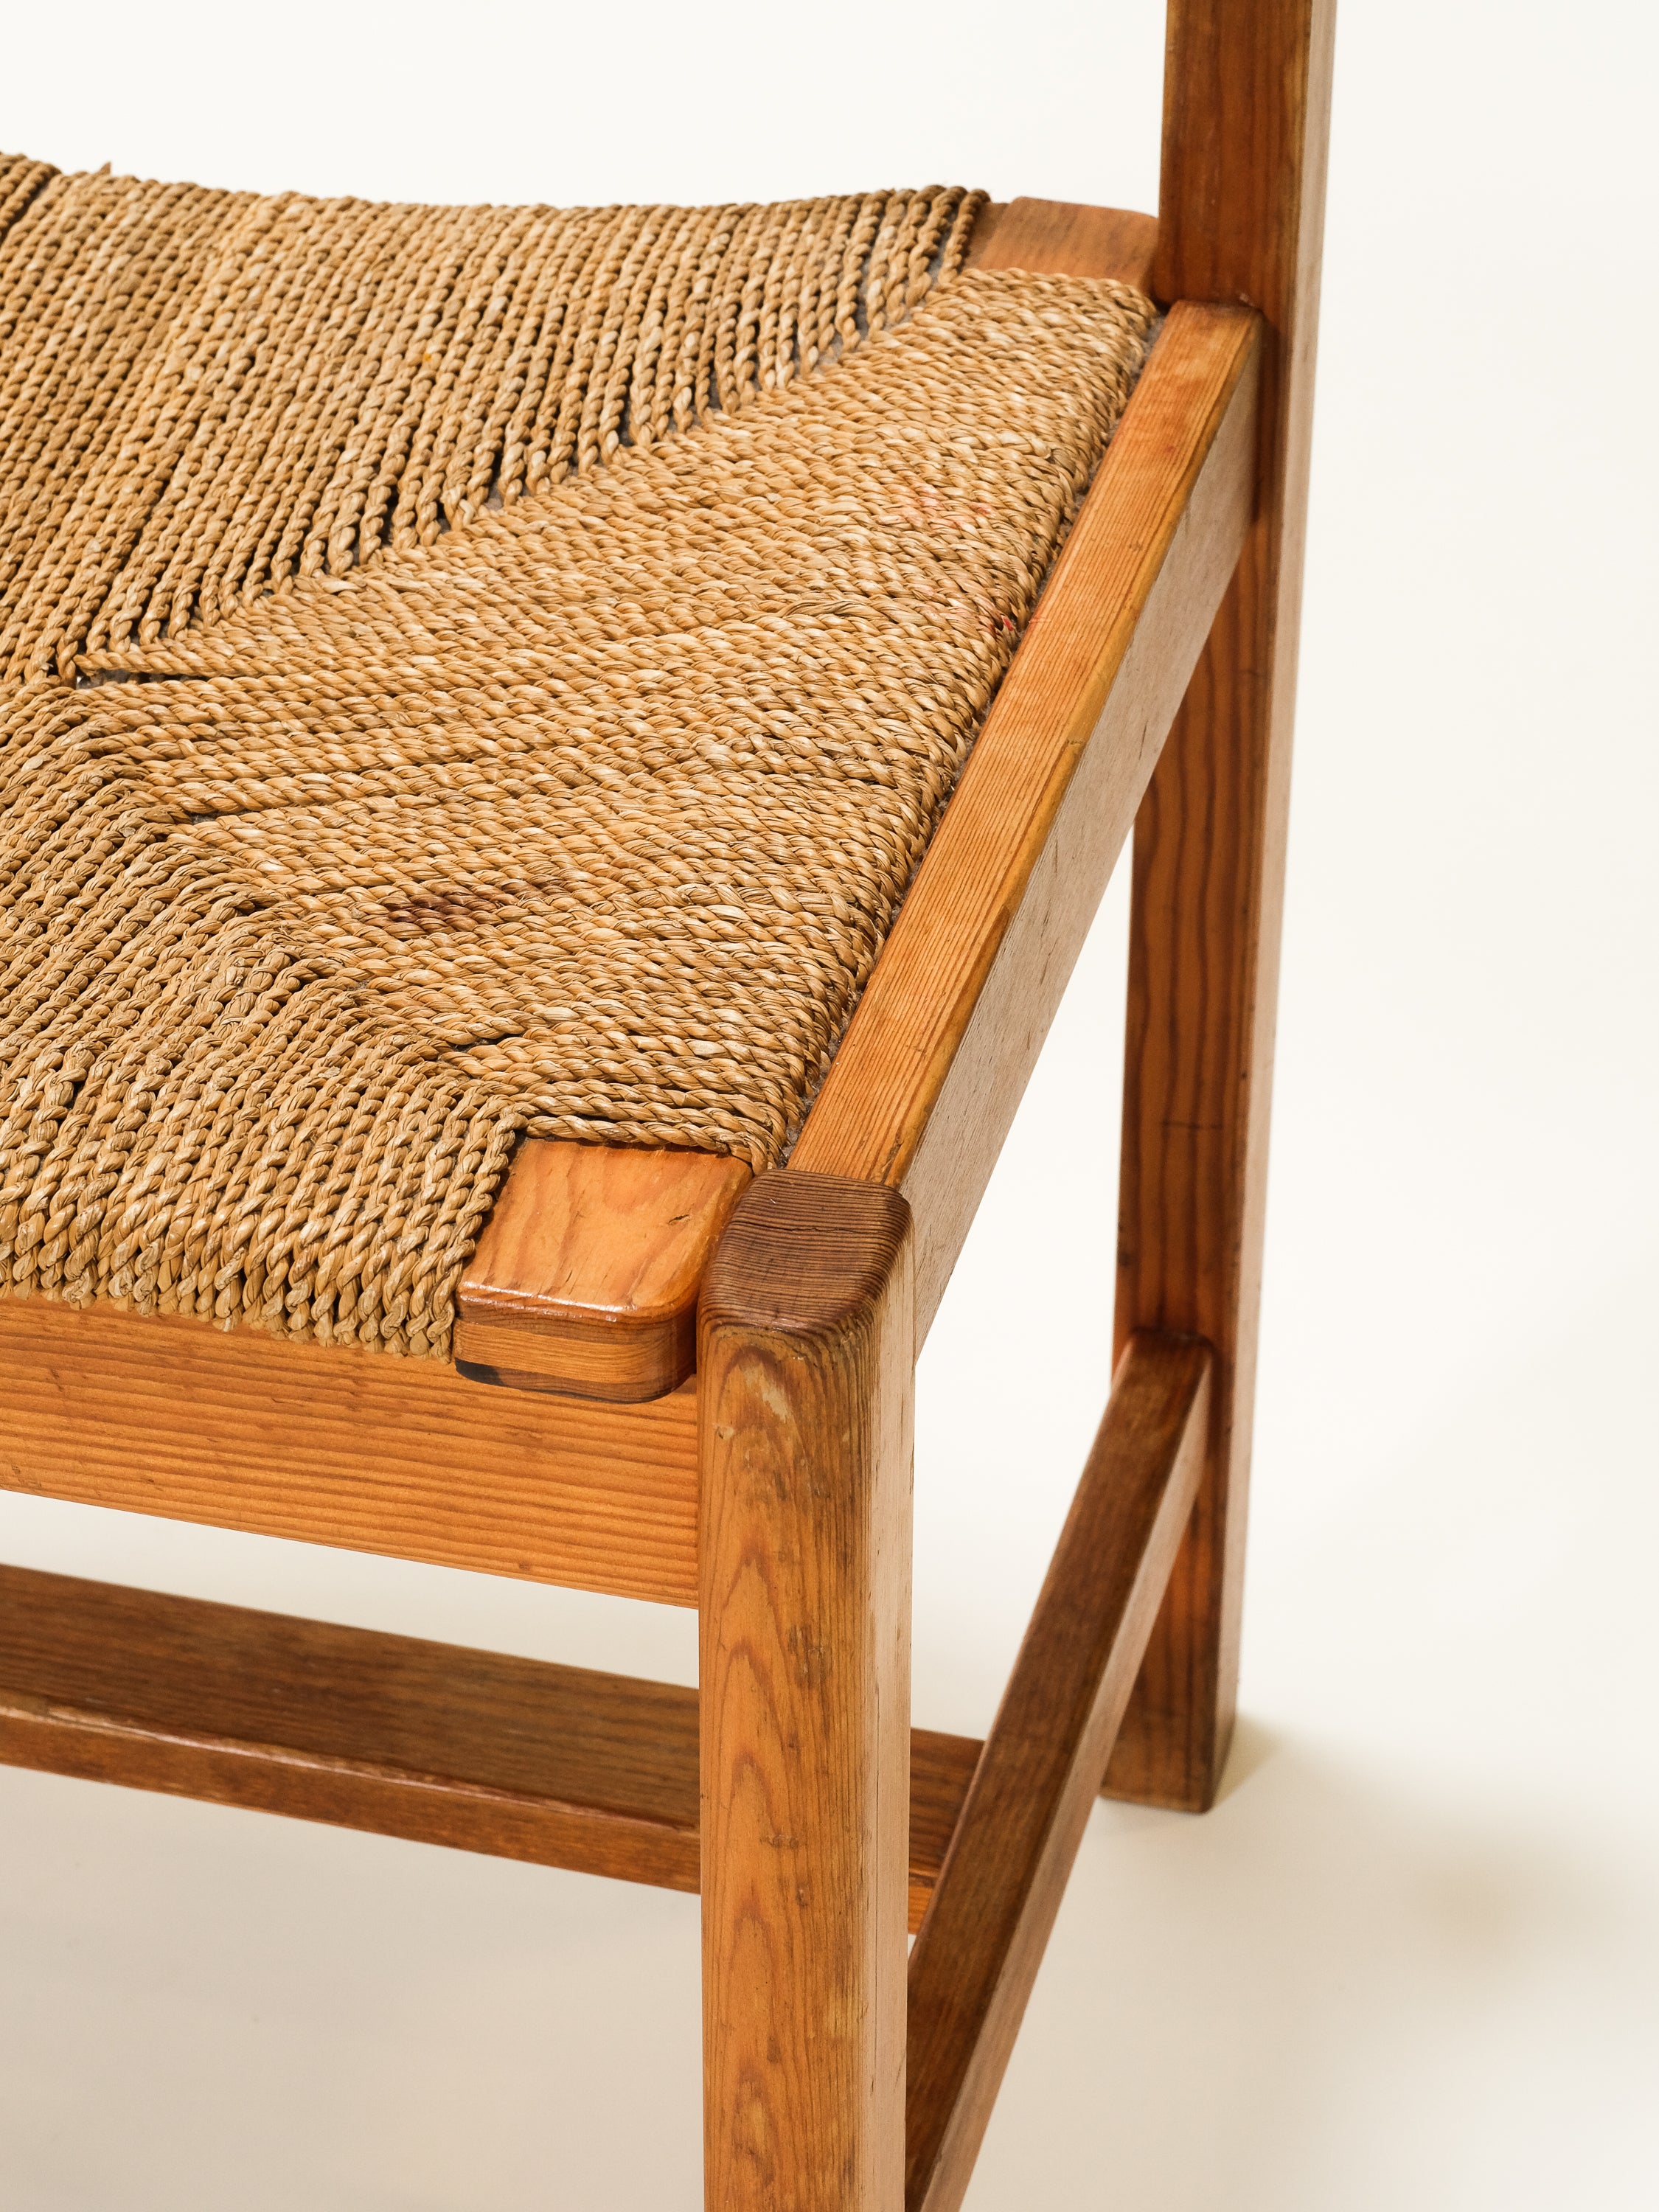 "Asserbo" Pine & Papercord Chair by Børge Mogensen for Karl Andersson & Söner